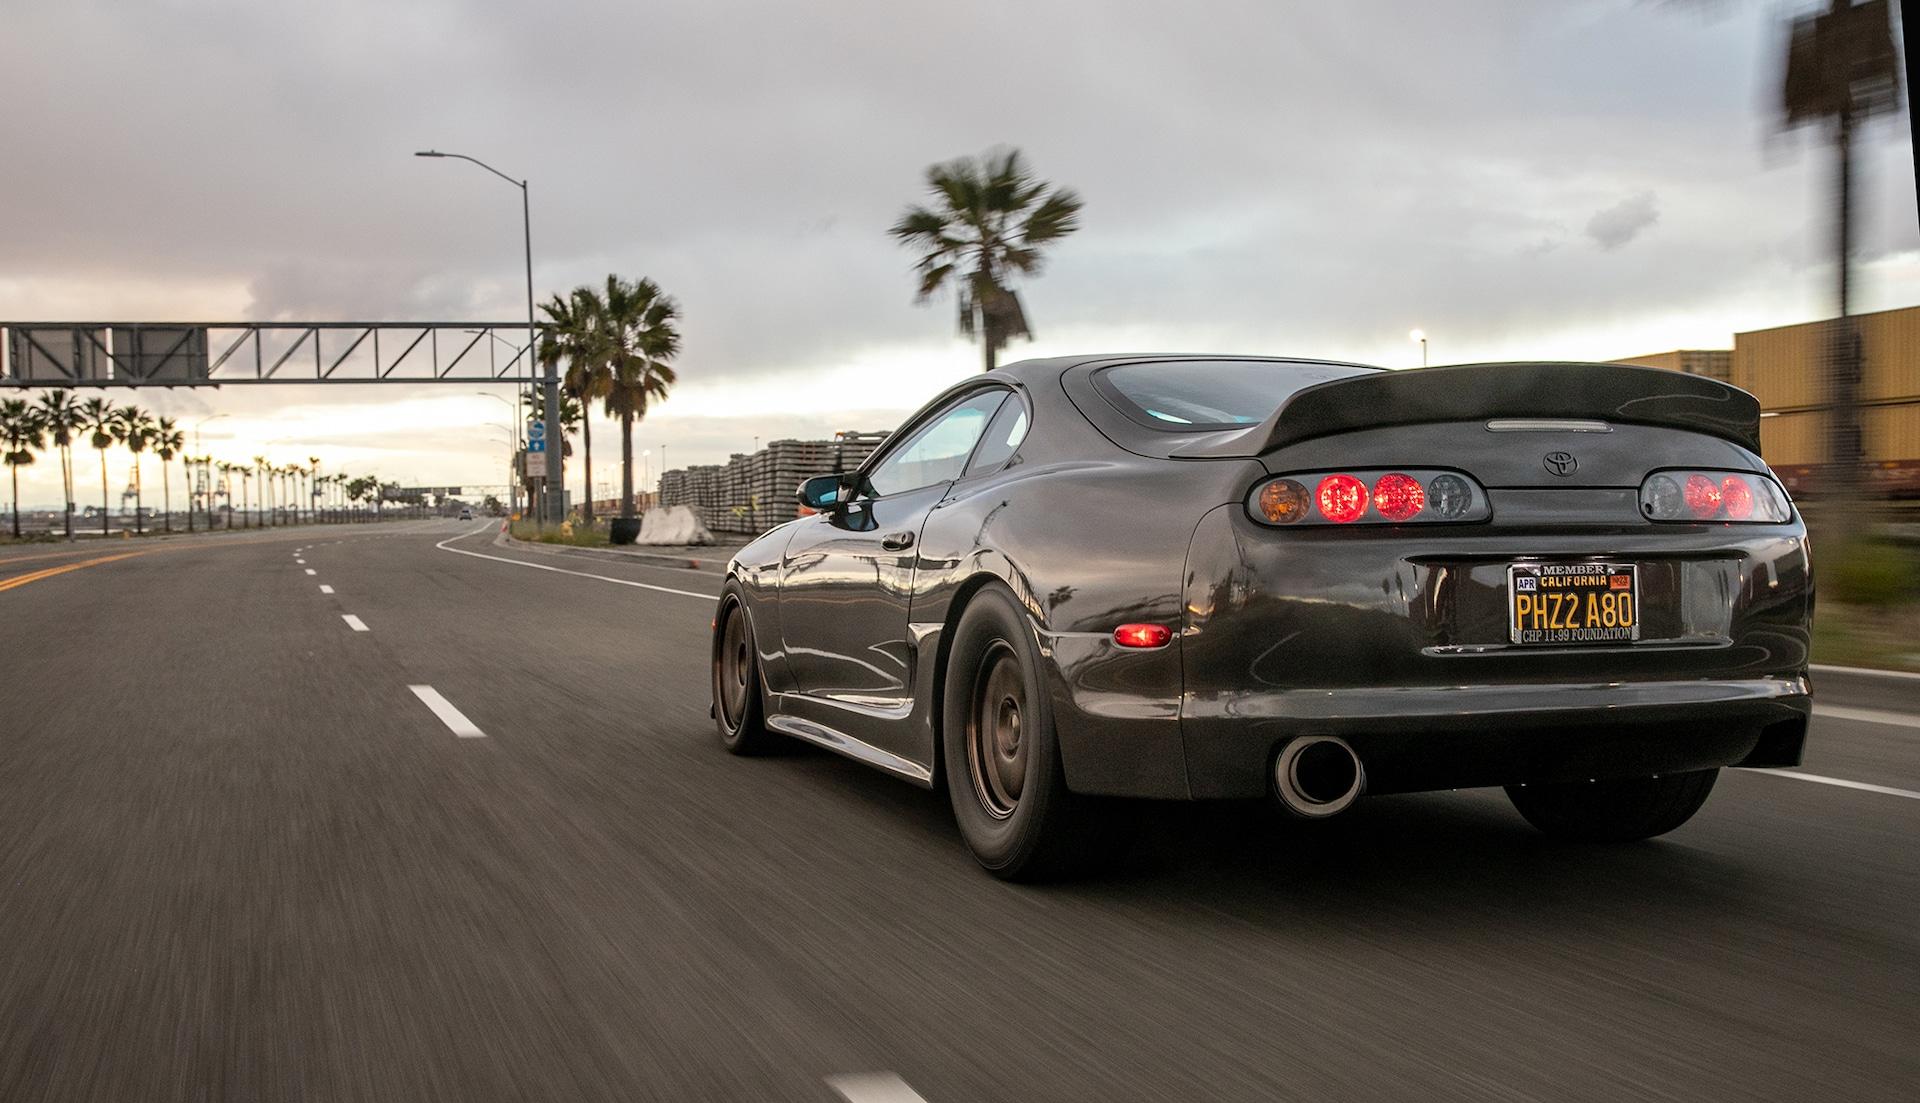 This 1000 HP Toyota Supra Represents a Delicate Balance of Life